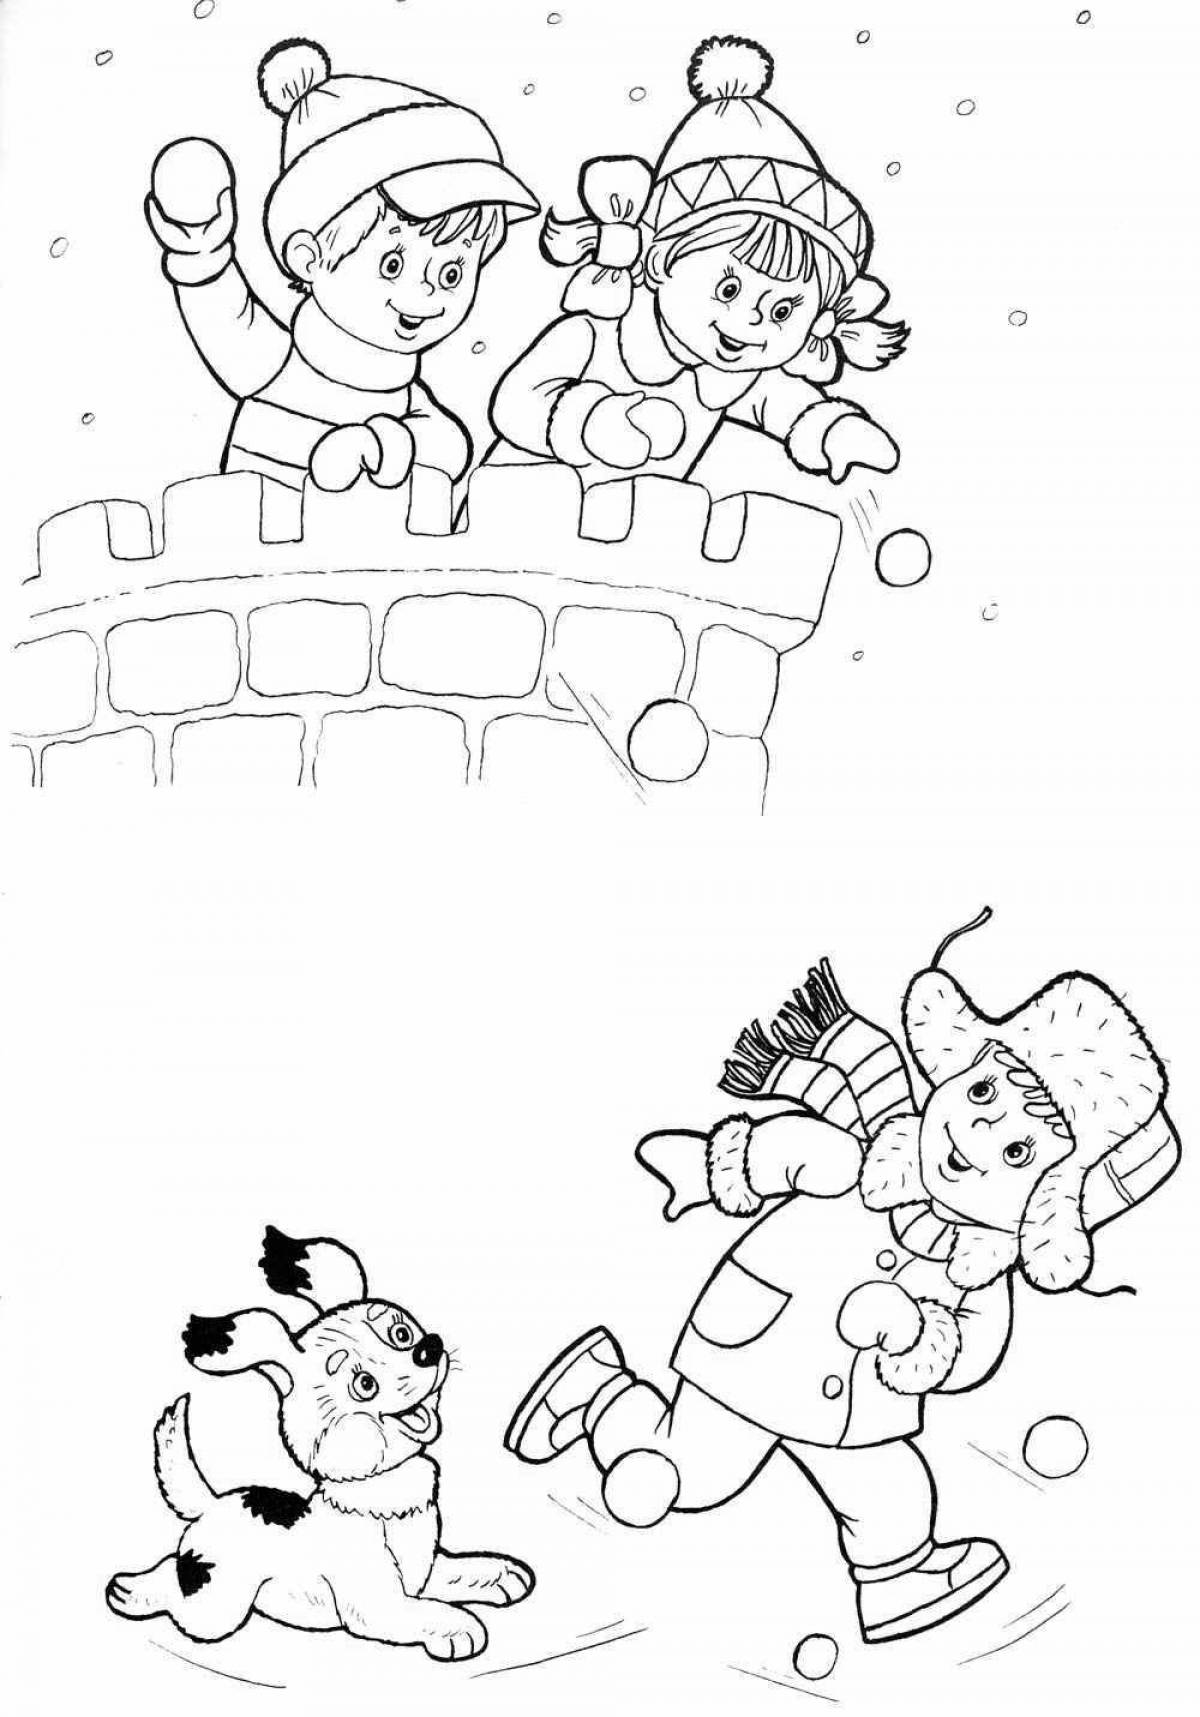 Radiant coloring page drawing winter fun